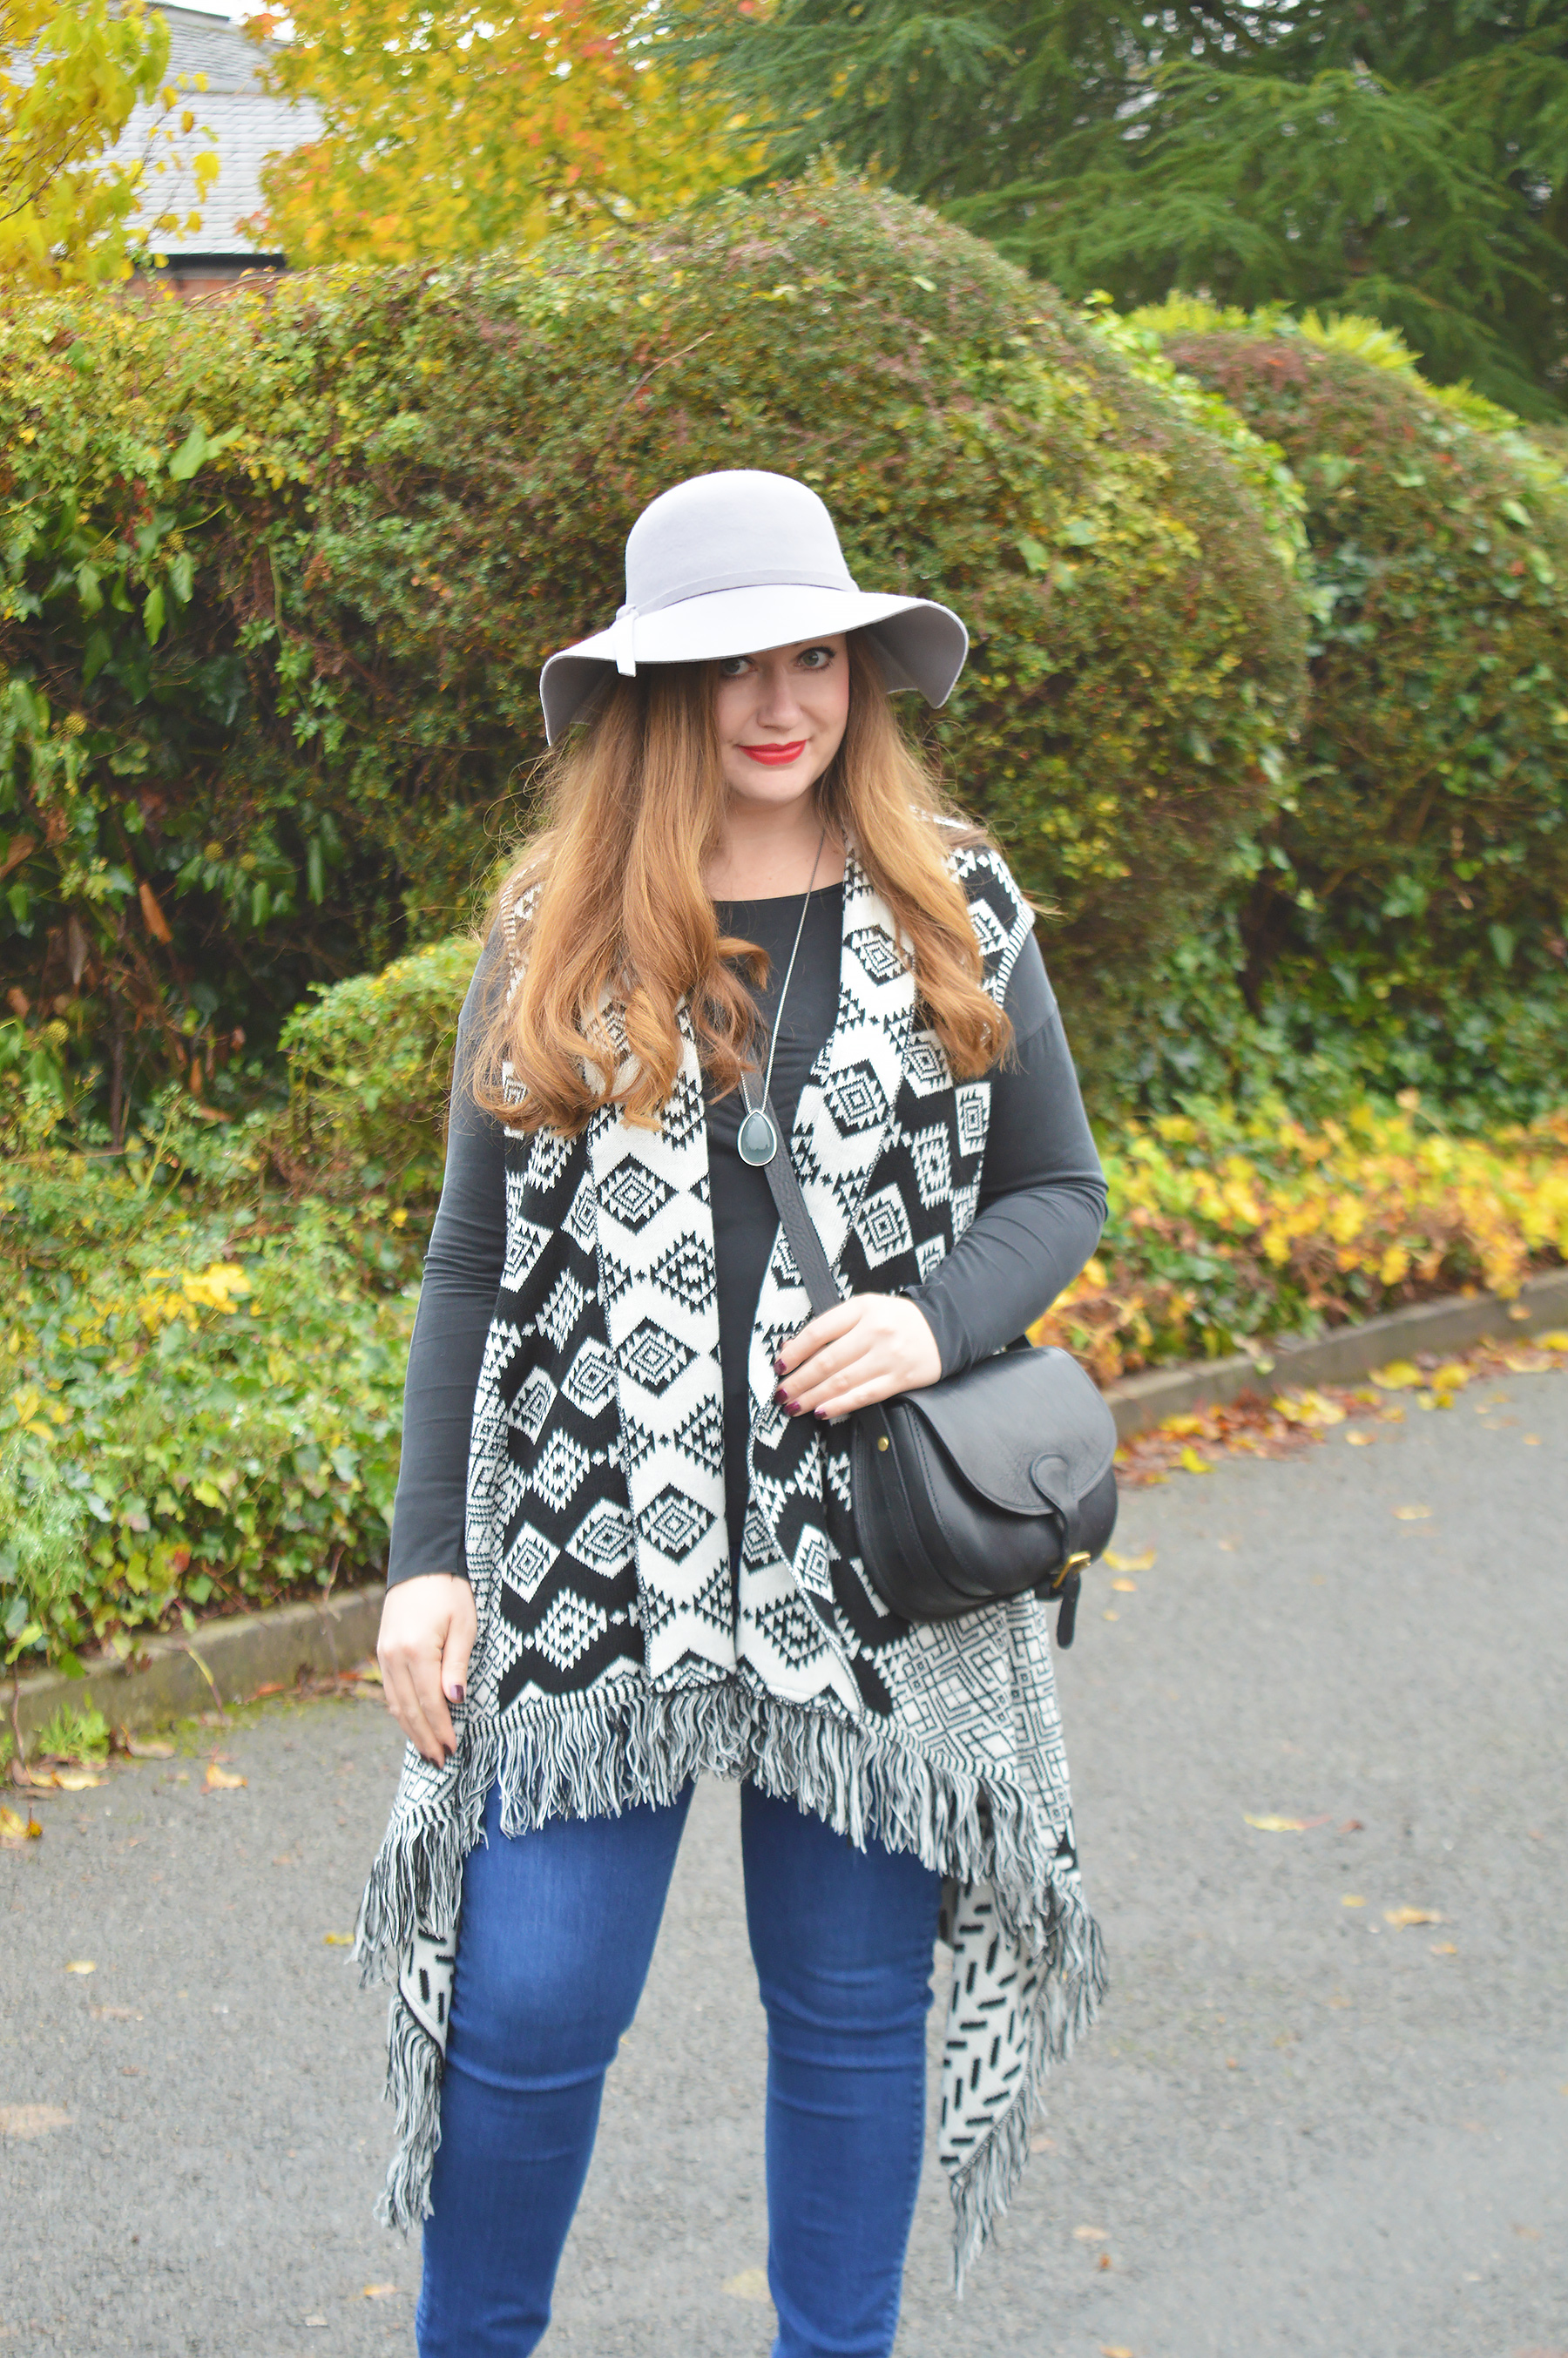 Boho style outfit with floppy hat and fringed cardigan